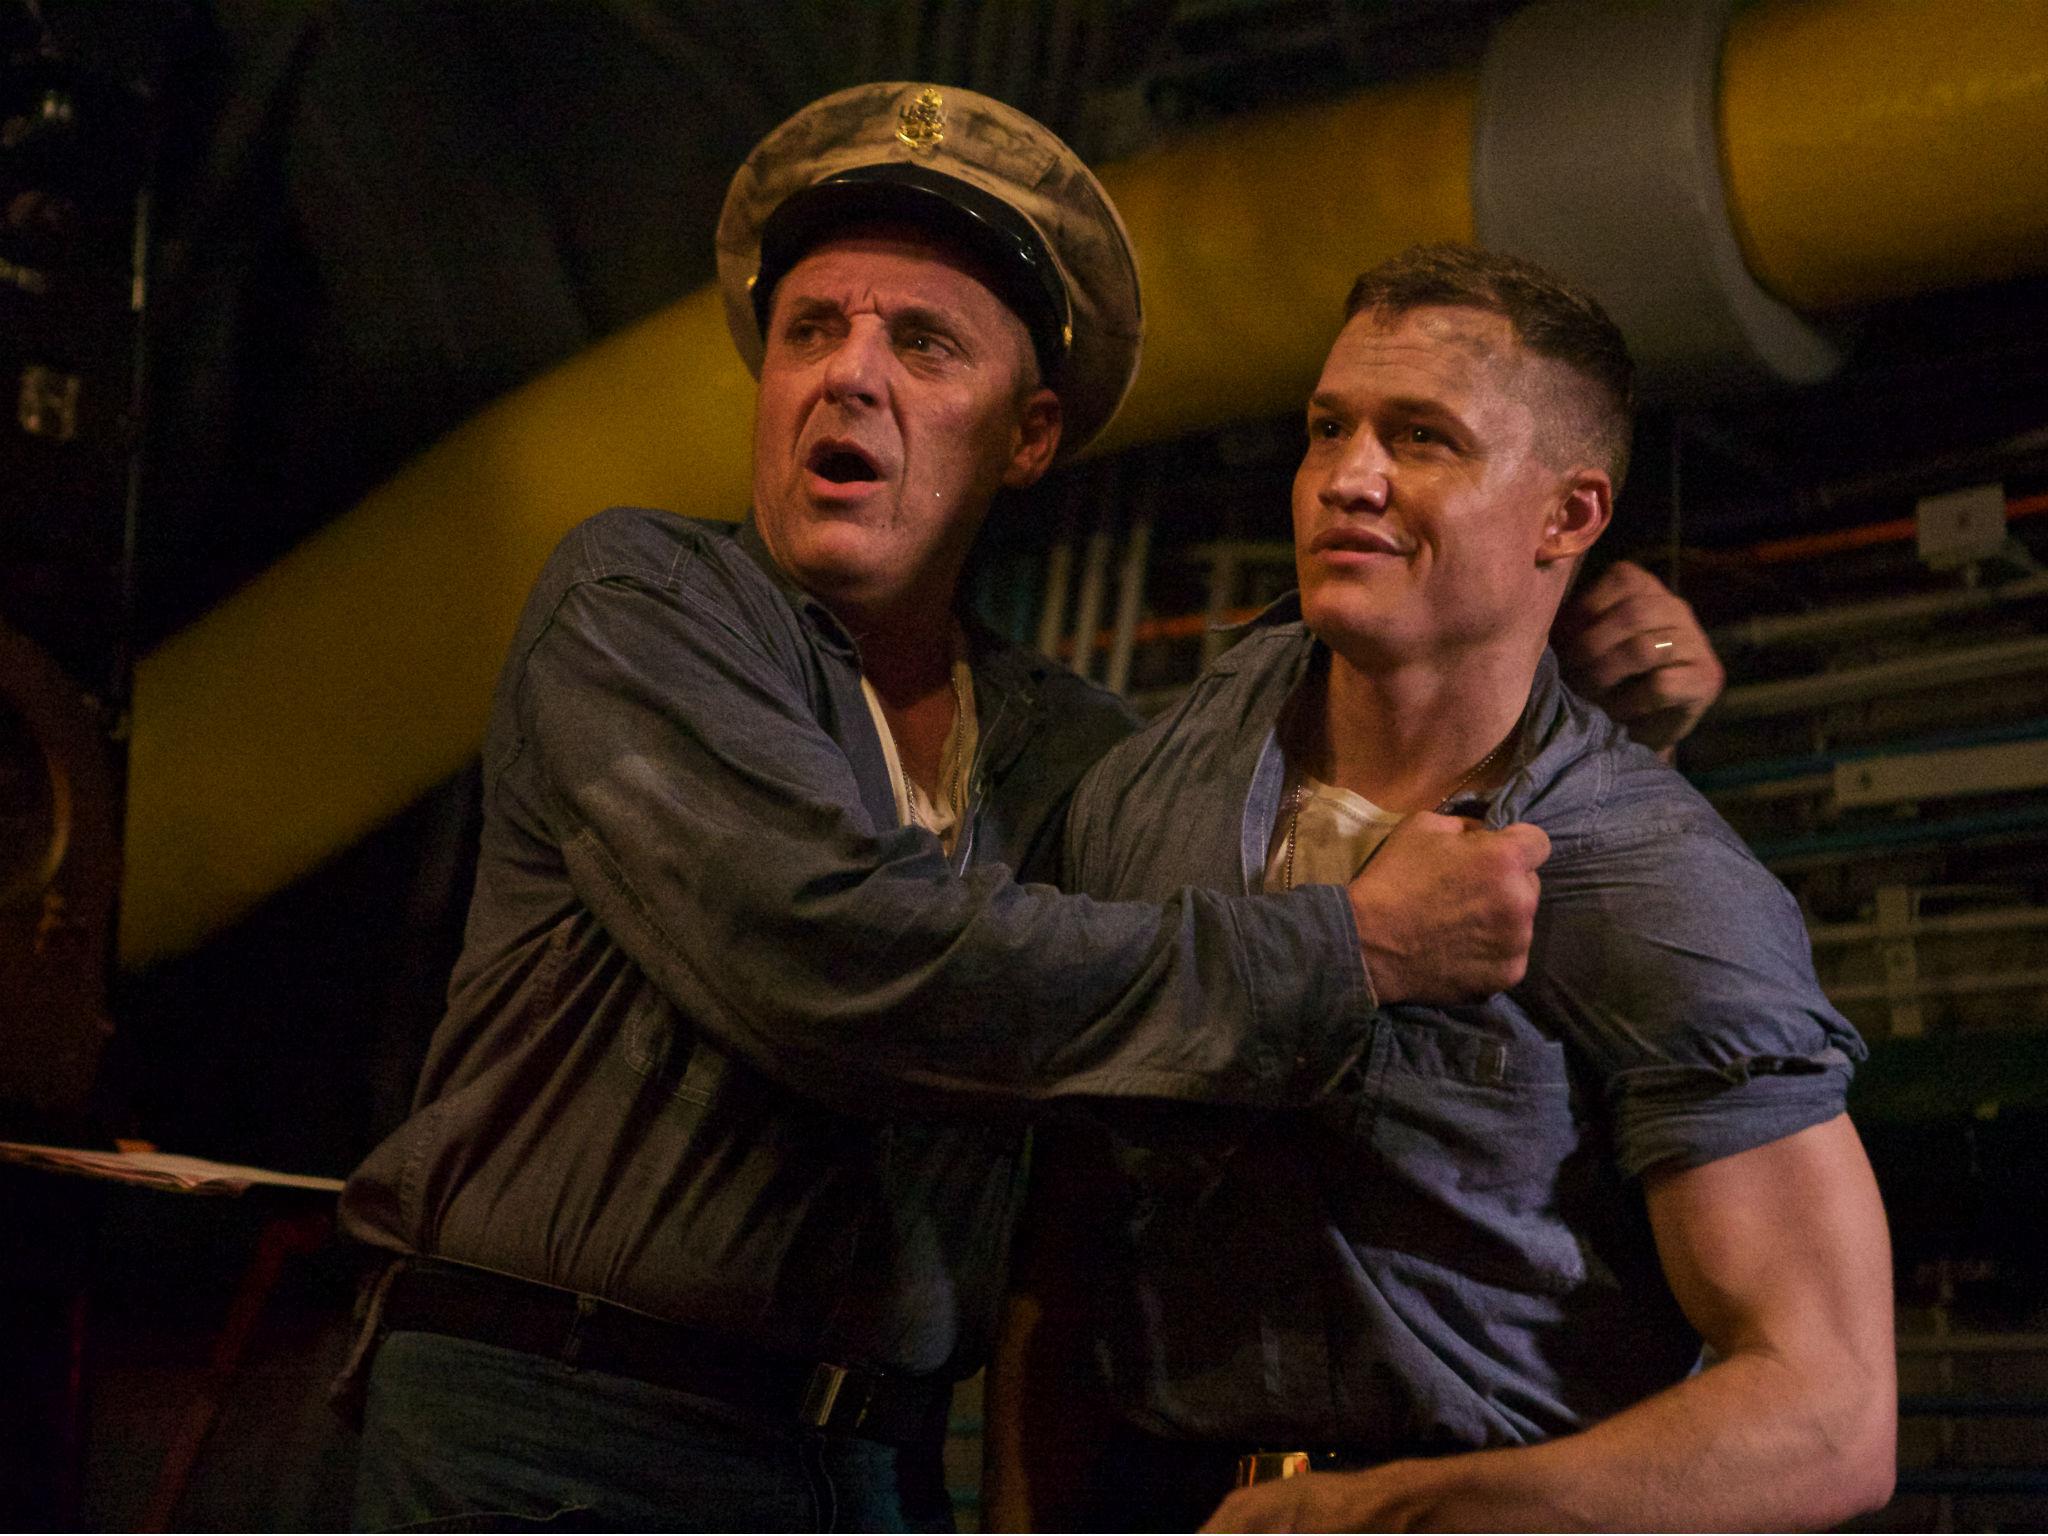 Tom Sizeman (left) and Matthew Pearson in ‘USS Indianapolis’ (2016). Sizeman was on the point of stardom after roles in ‘Heat‘ and ‘Saving Private Ryan’ in the late Nineties before drugs and lurid debauchery brought him down again